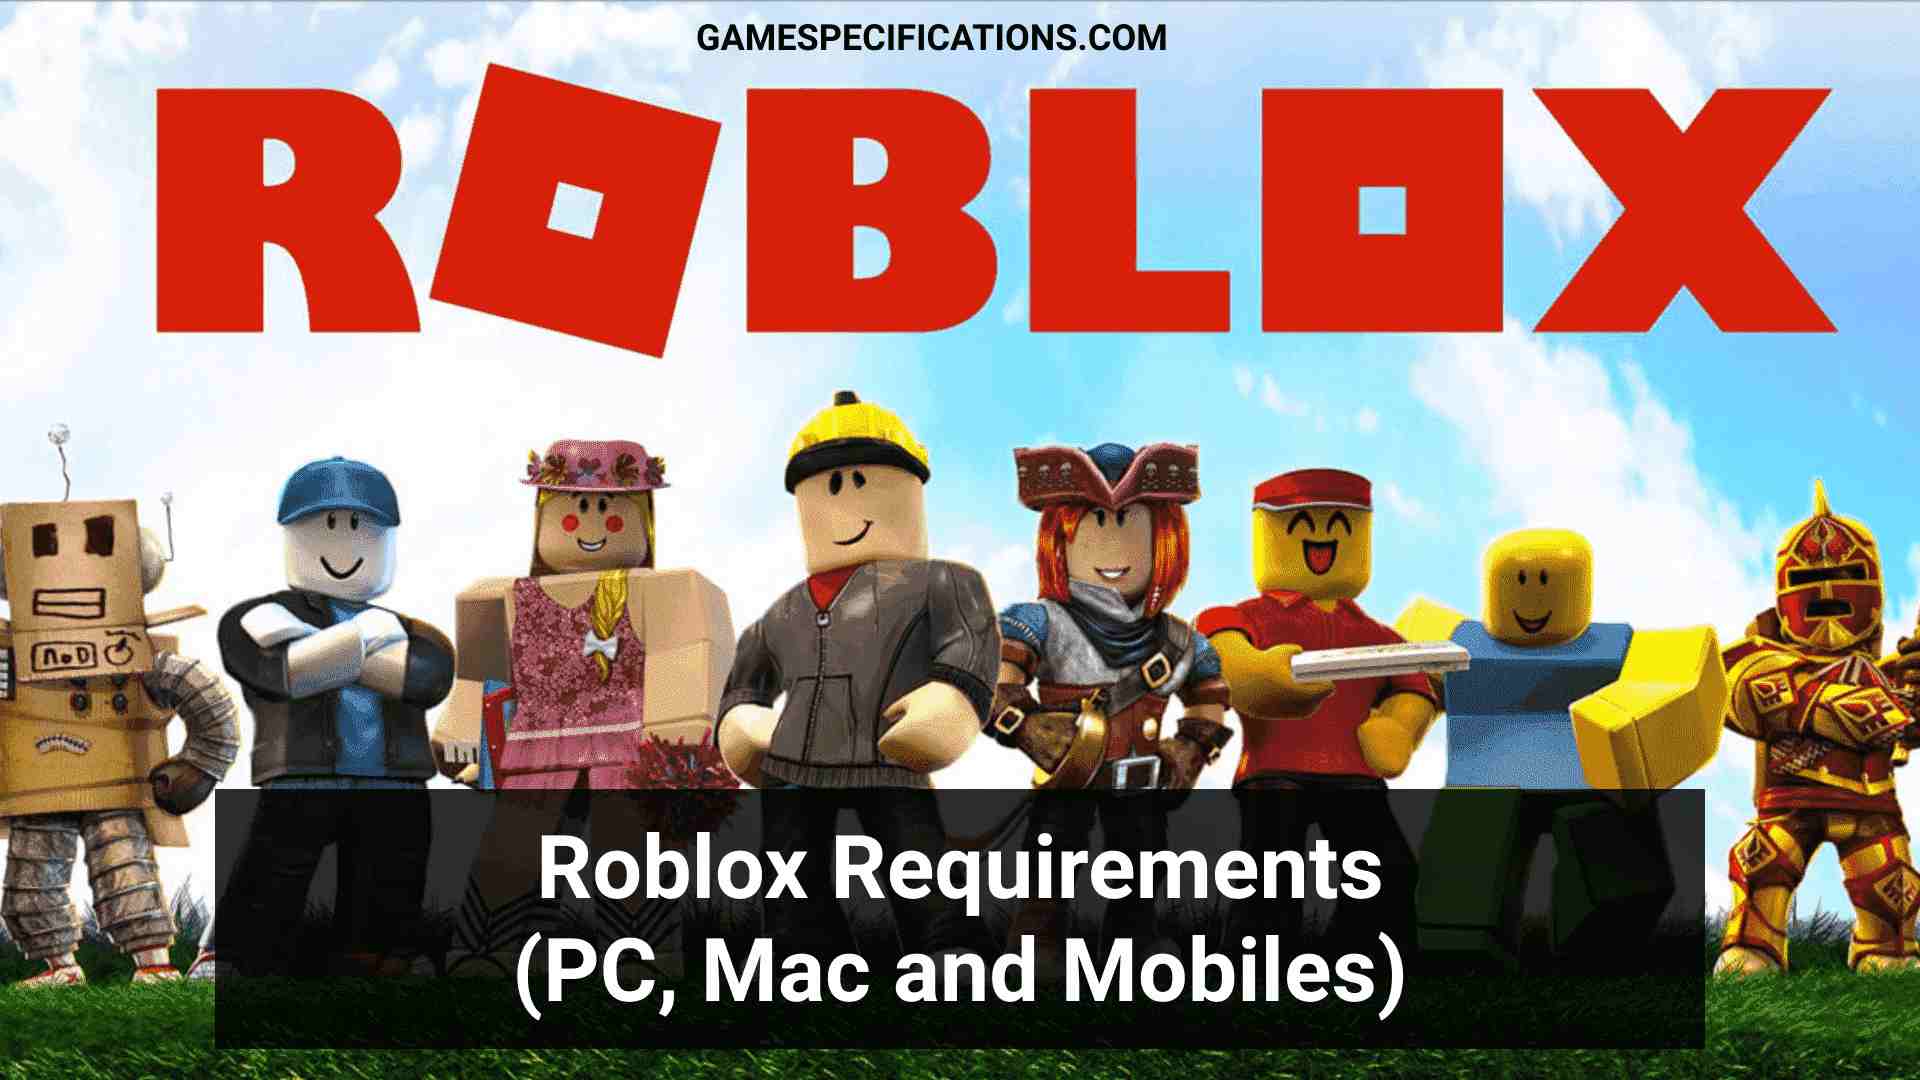 Roblox Requirements For Windows Pc Mac Android Ios Xbox And Ps4 Game Specifications - t roads roblox